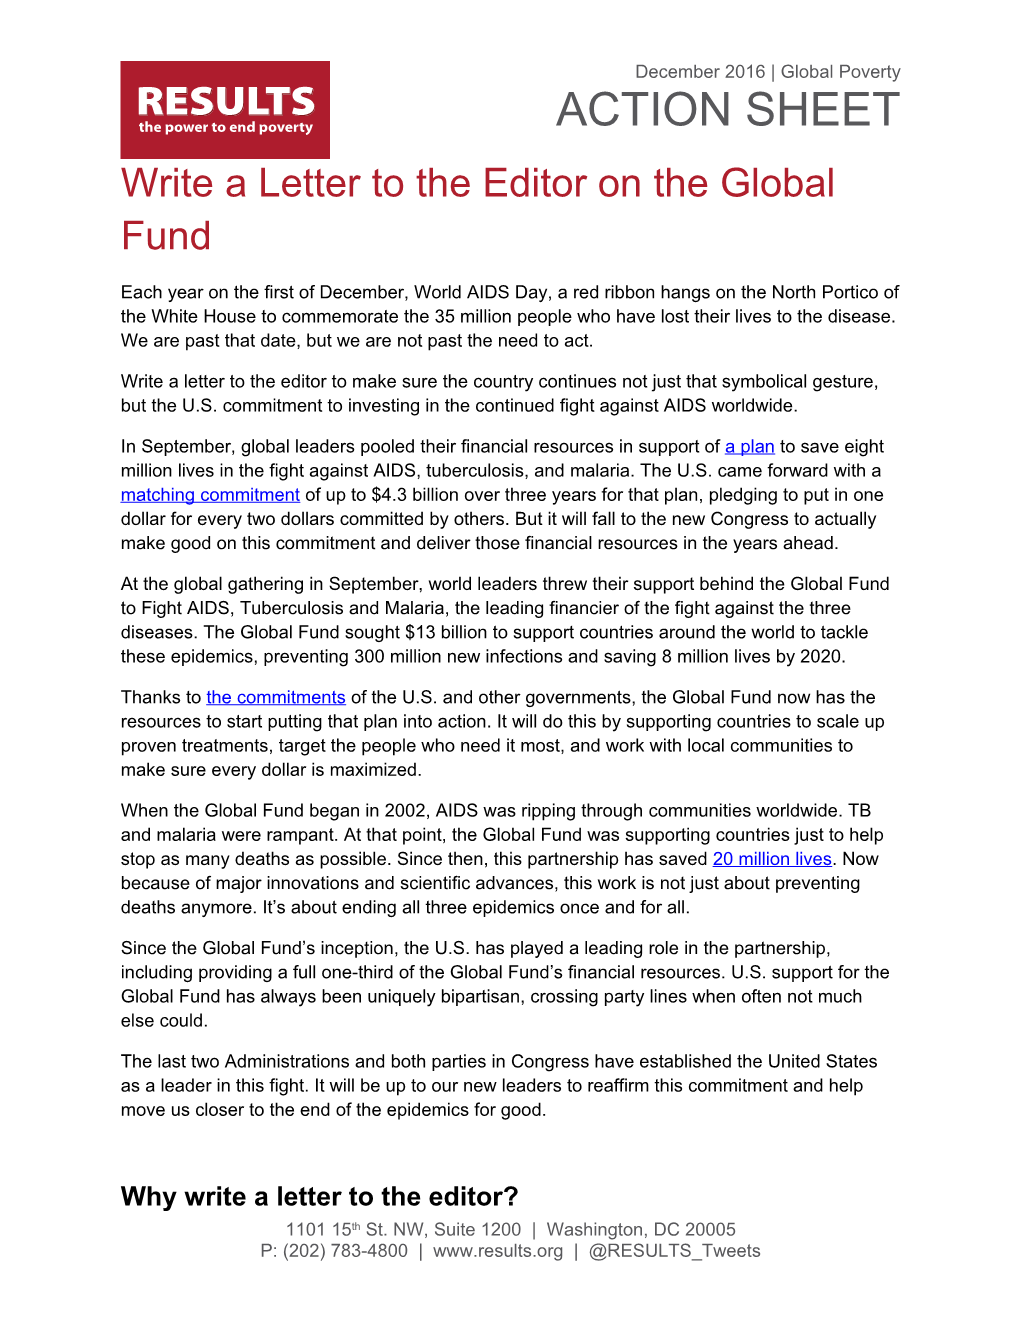 Write a Letter to the Editor on the Global Fund